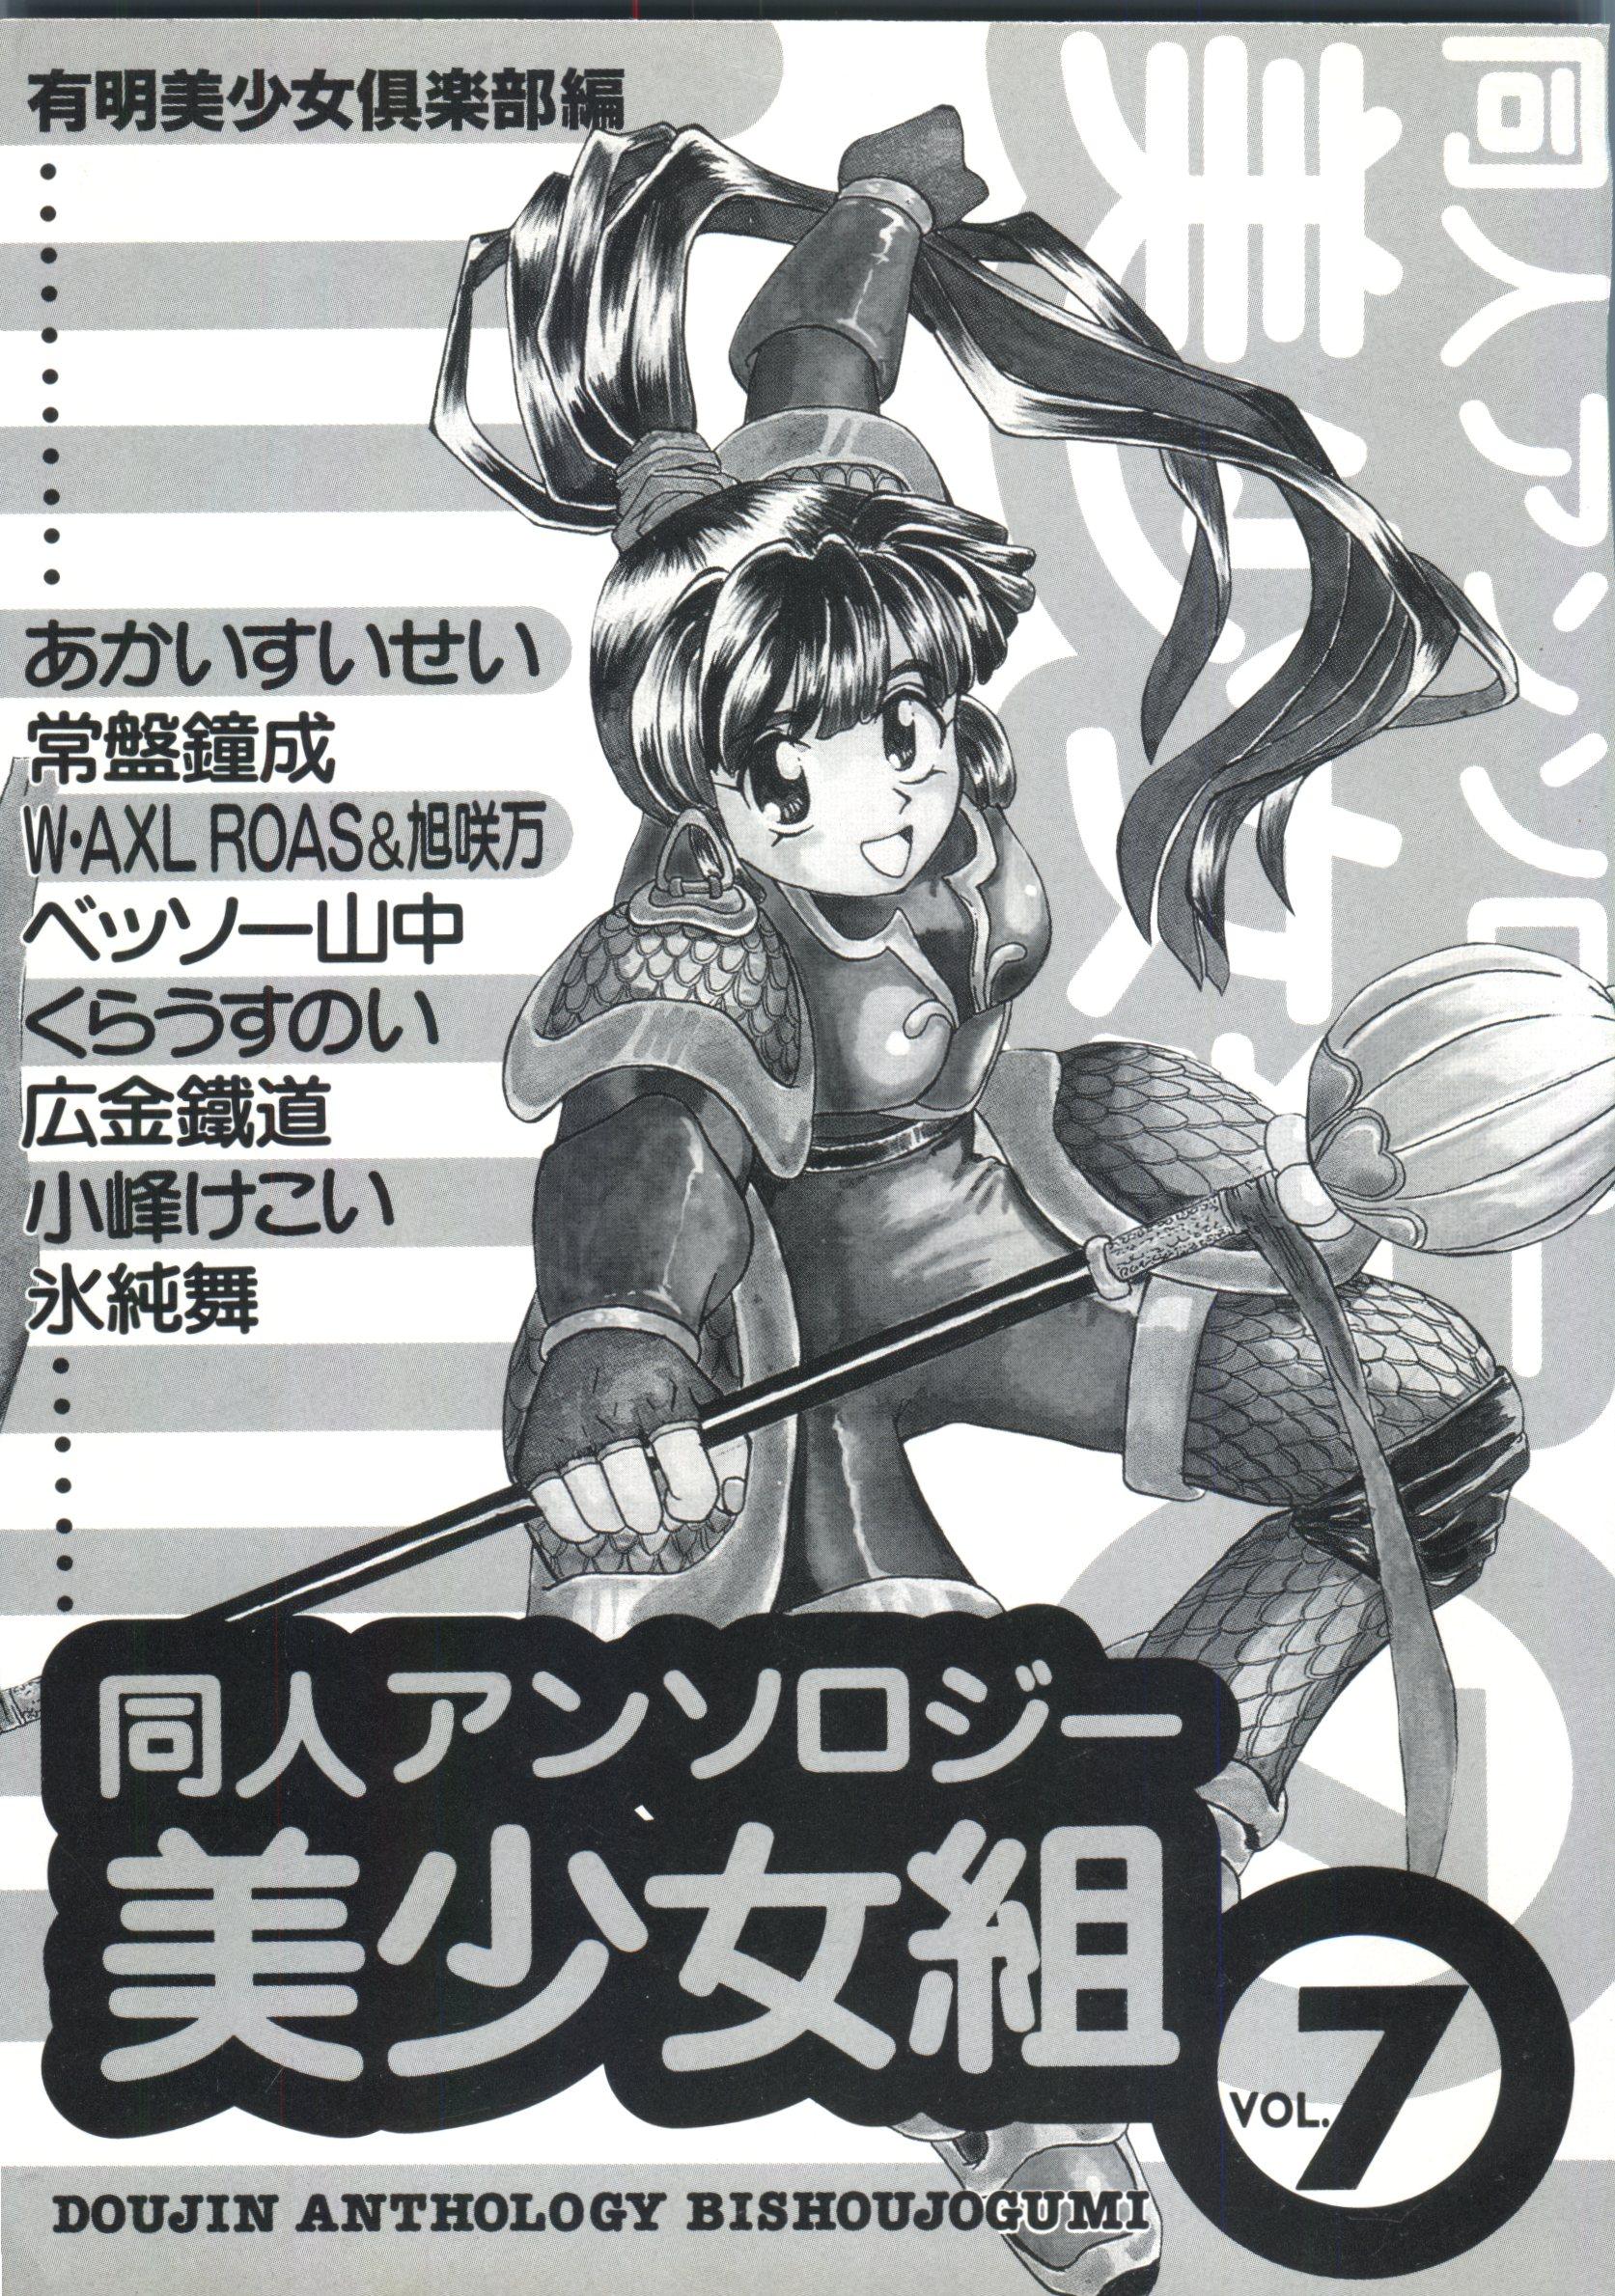 Blackcocks Doujin Anthology Bishoujo Gumi 7 - Neon genesis evangelion Sailor moon King of fighters Magic knight rayearth Saint tail Fodendo - Page 4